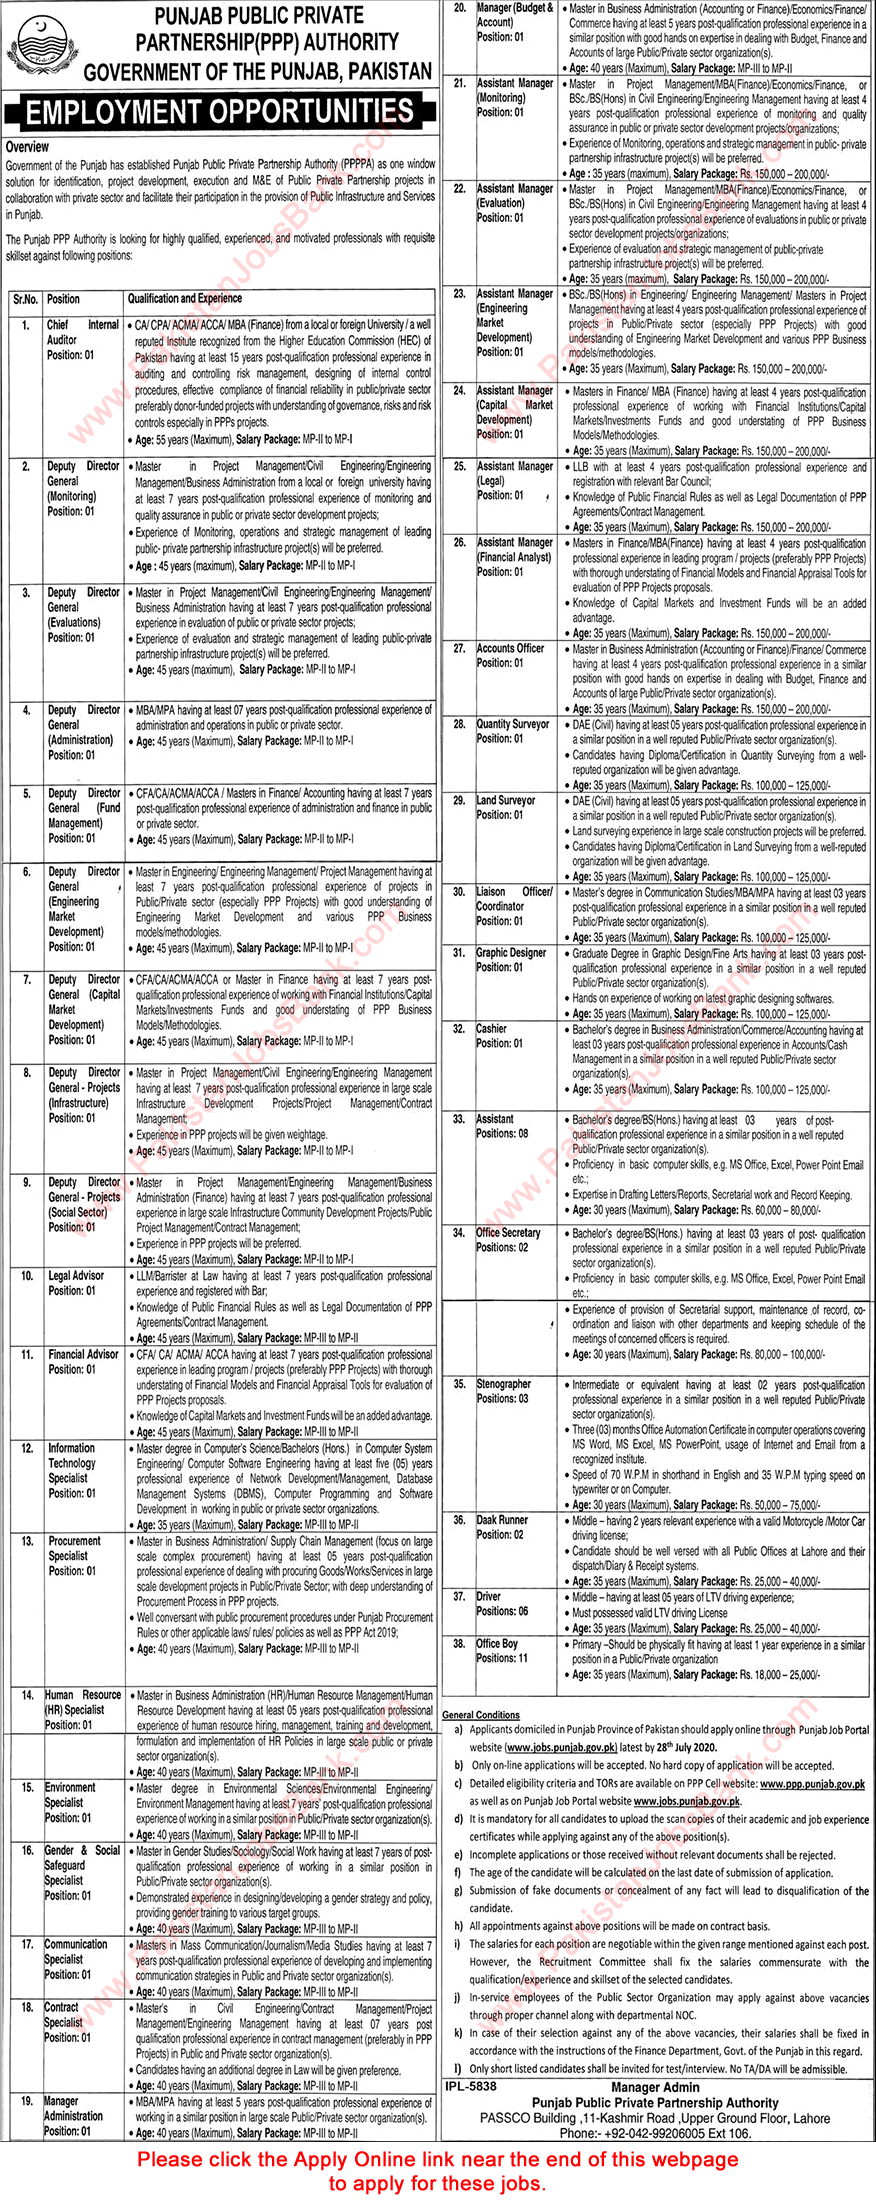 Punjab Public Private Partnership Authority Jobs 2020 July Apply Online Assistant Managers, Deputy Directors & Others Latest